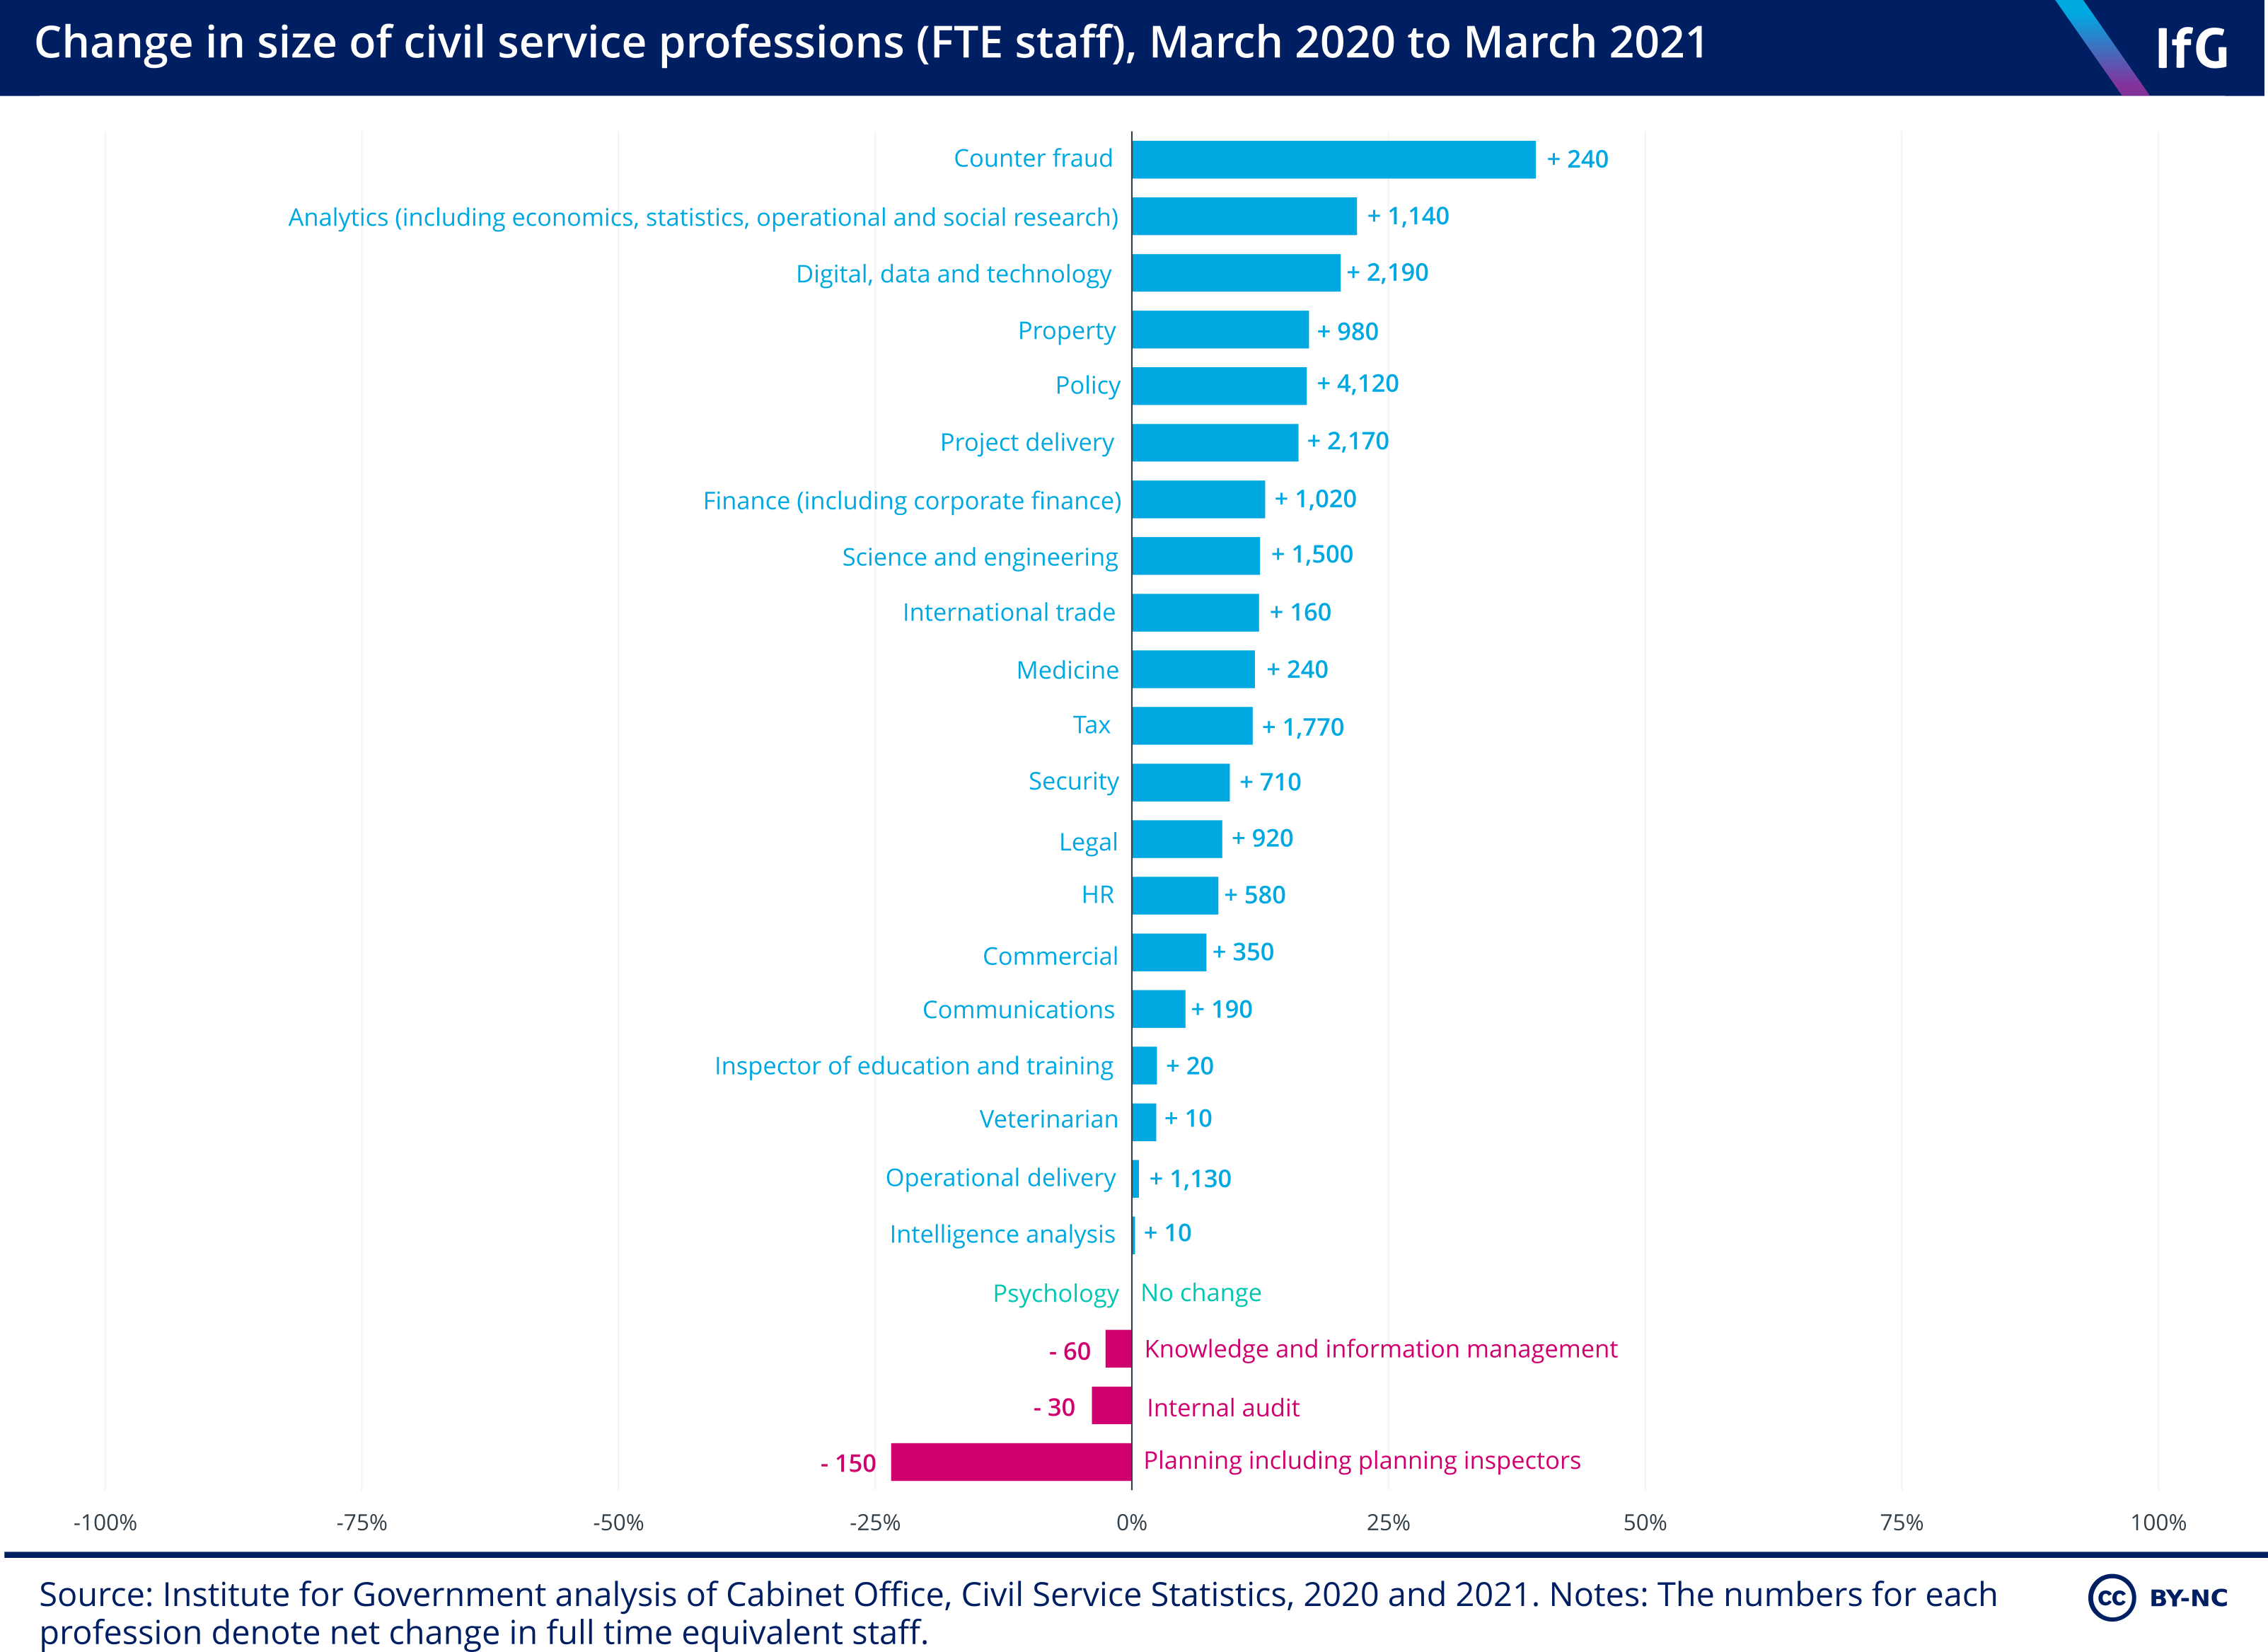 Change in size of civil service professions (FTE staff), March 2020 to March 2021